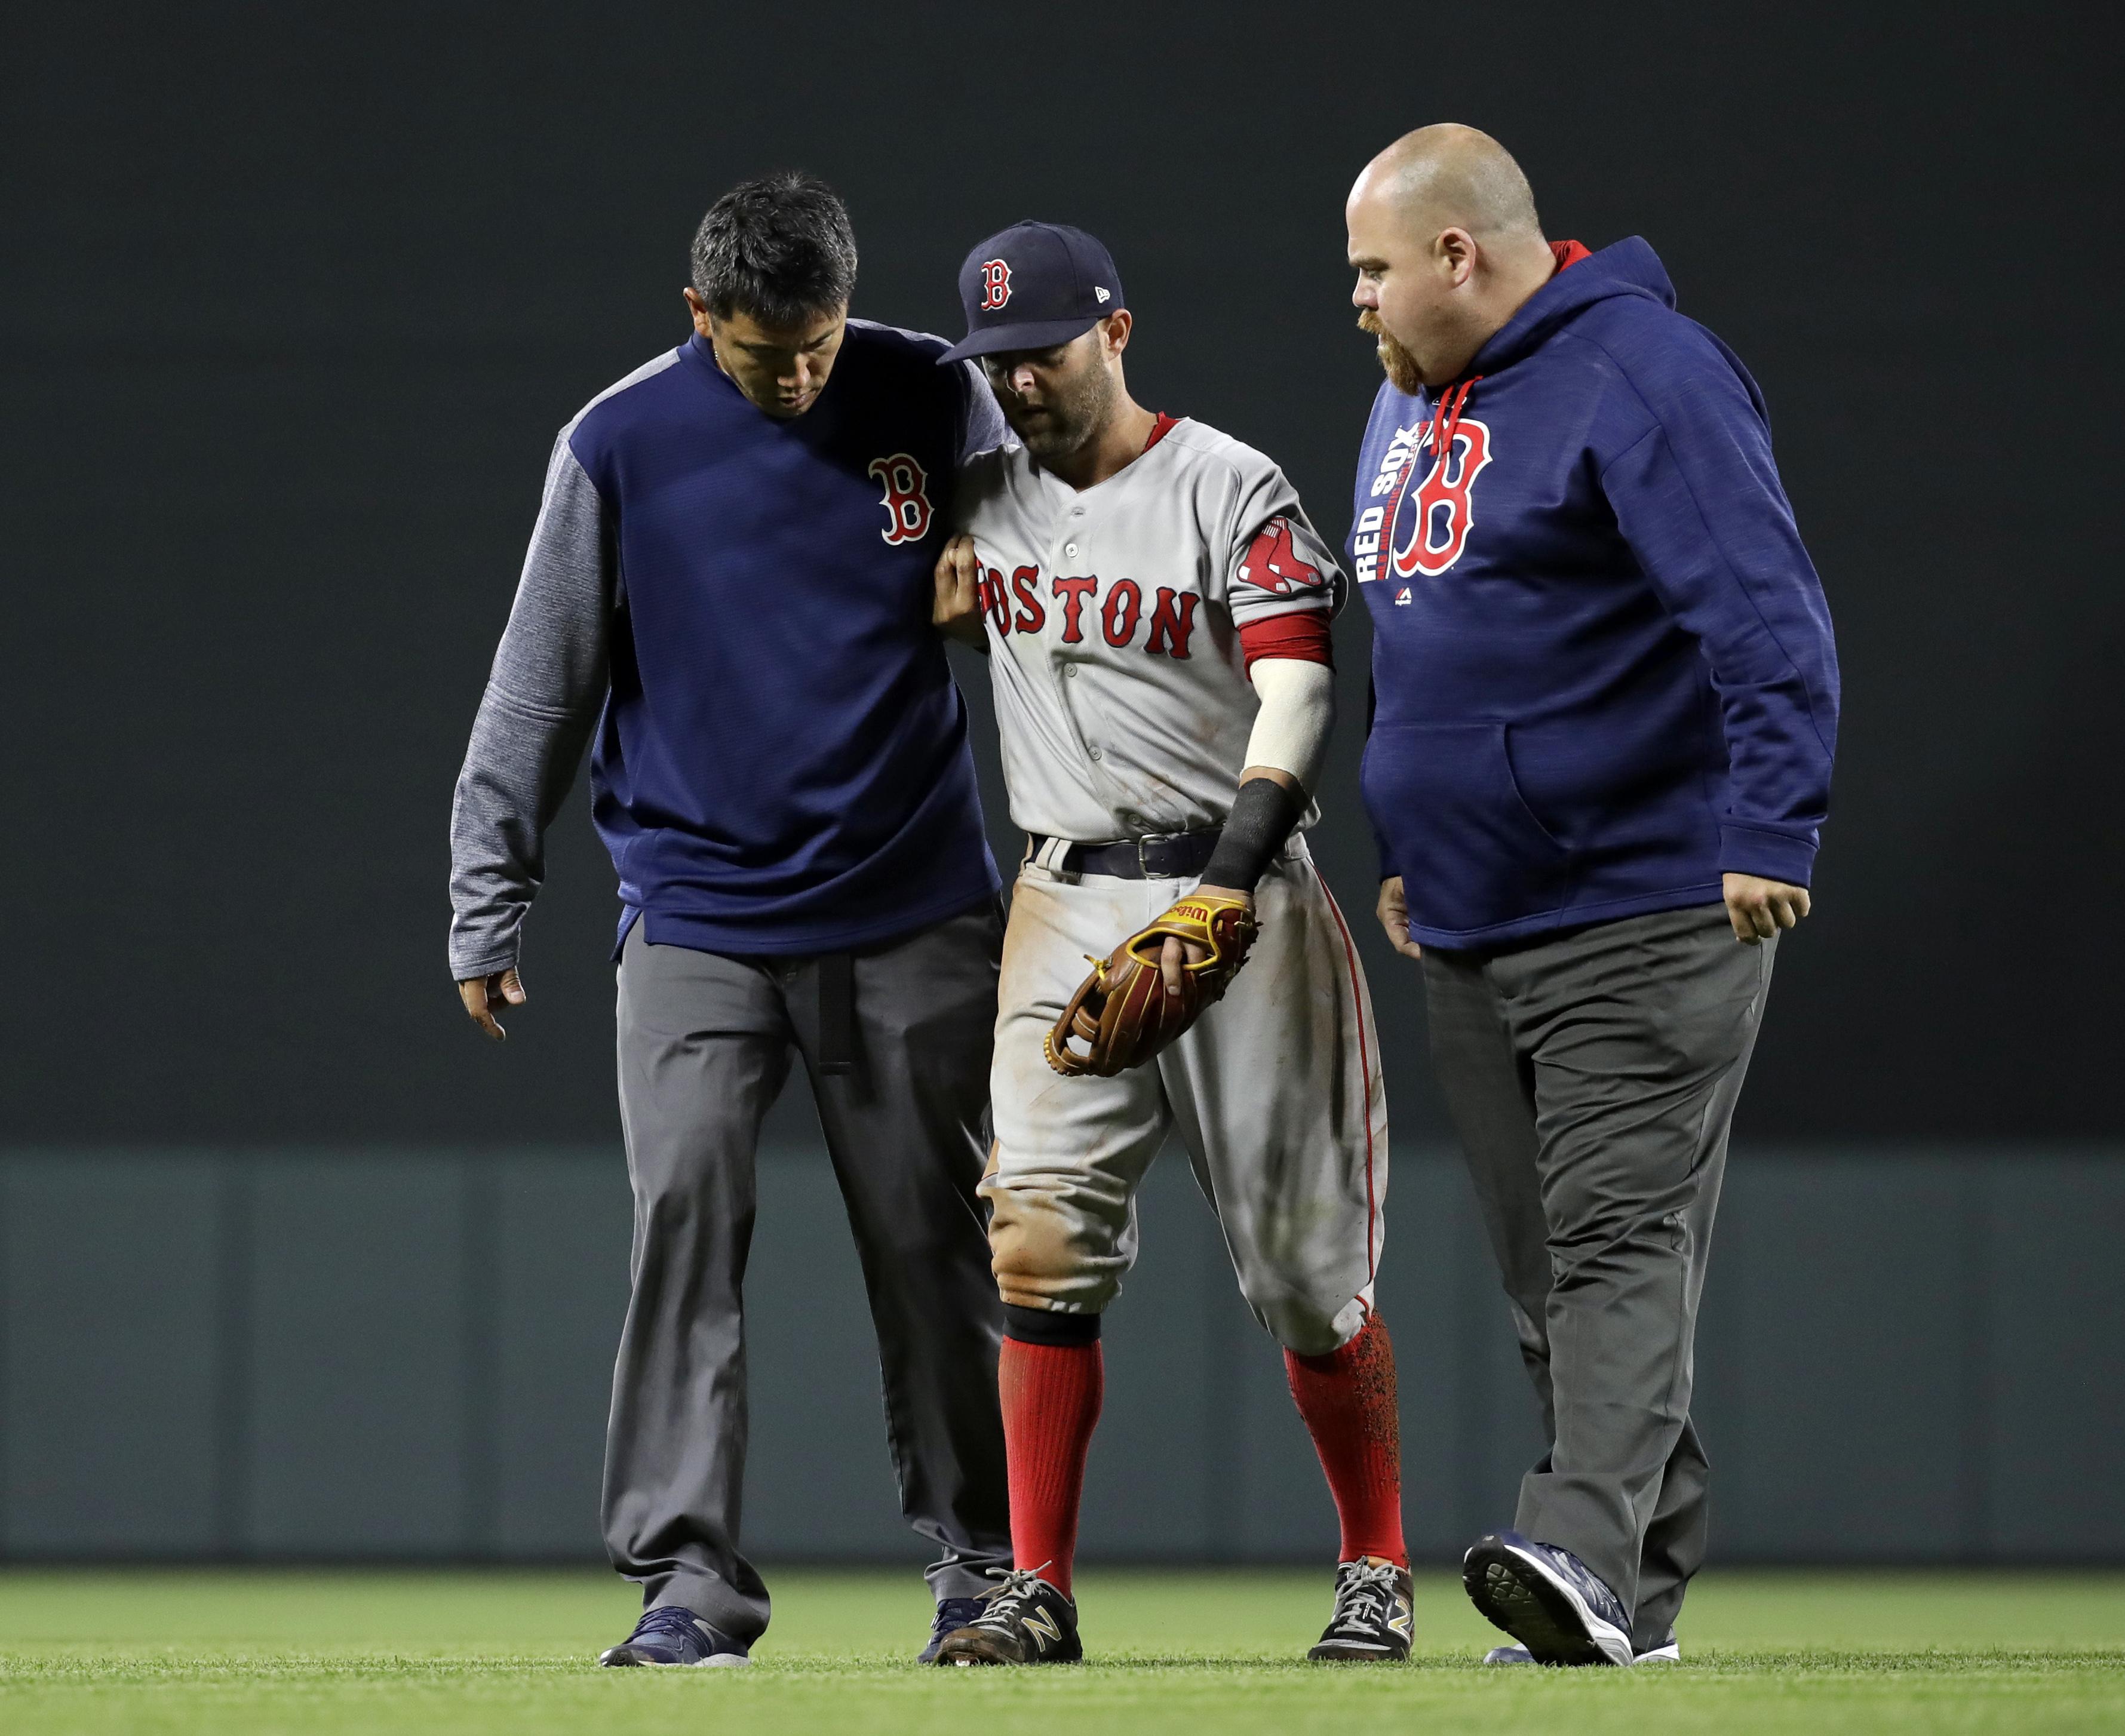 2B Dustin Pedroia returns from bad knee, rejoins Red Sox on Friday